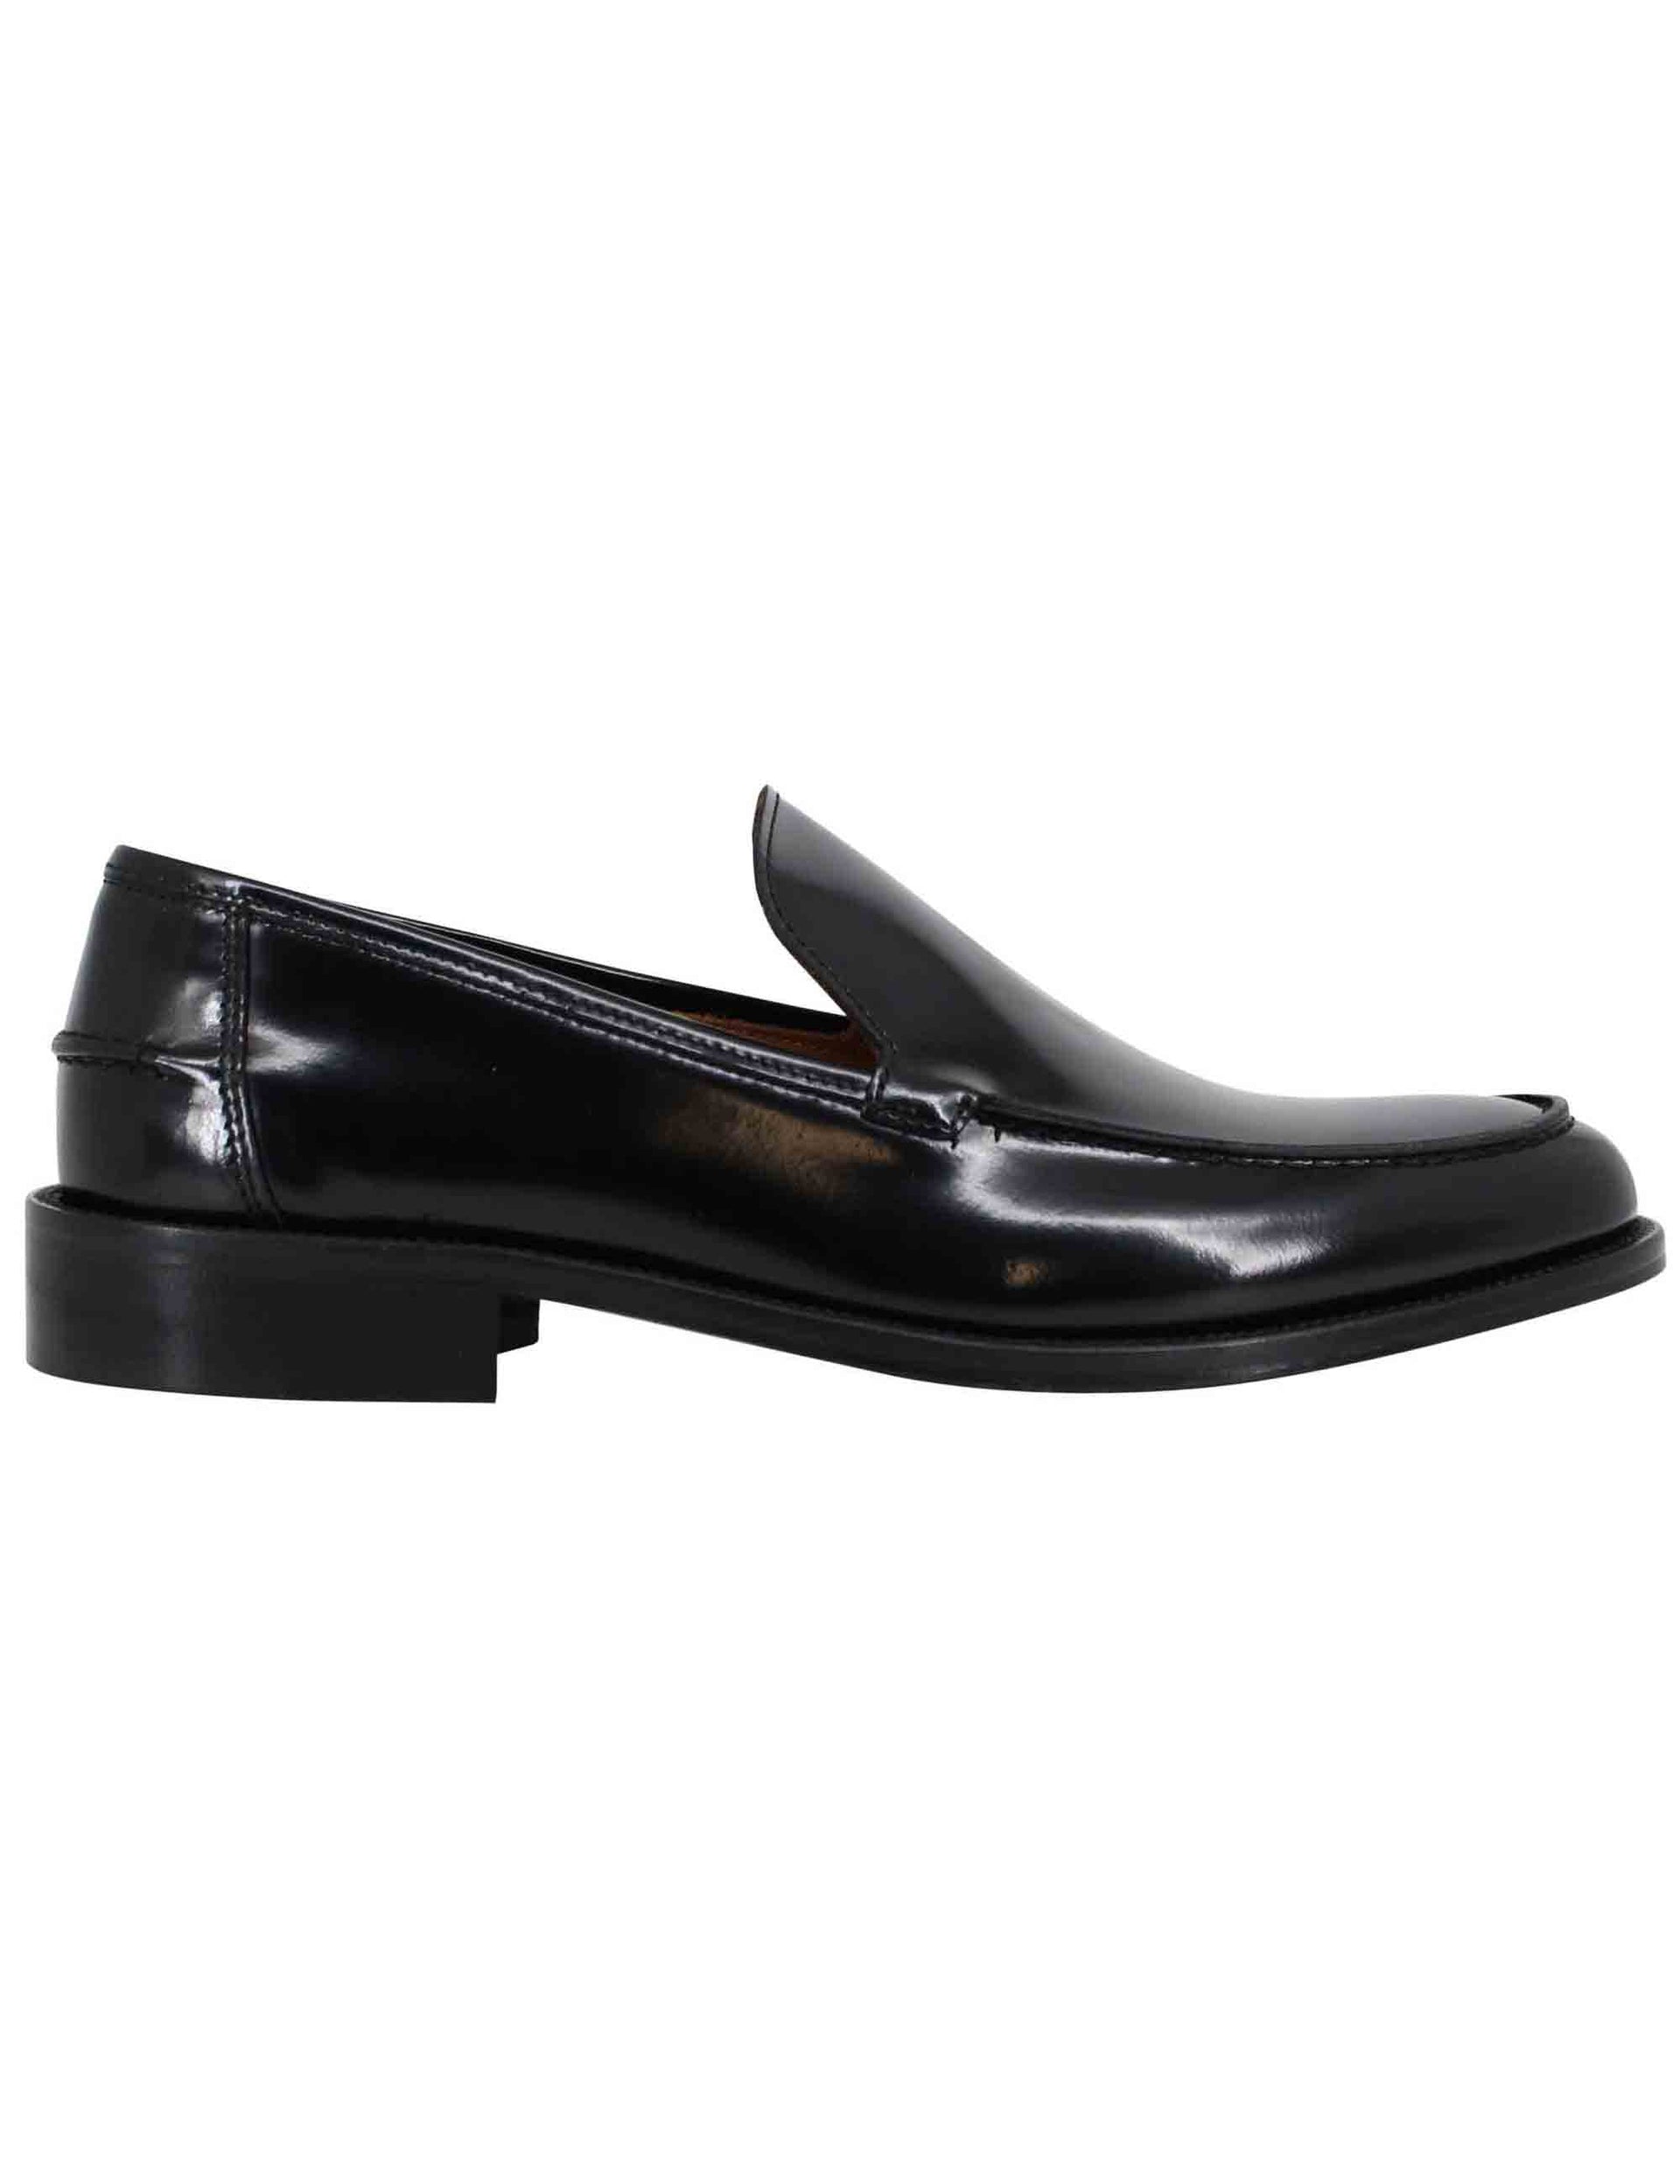 Men's moccasins in shiny black leather with stitched leather sole